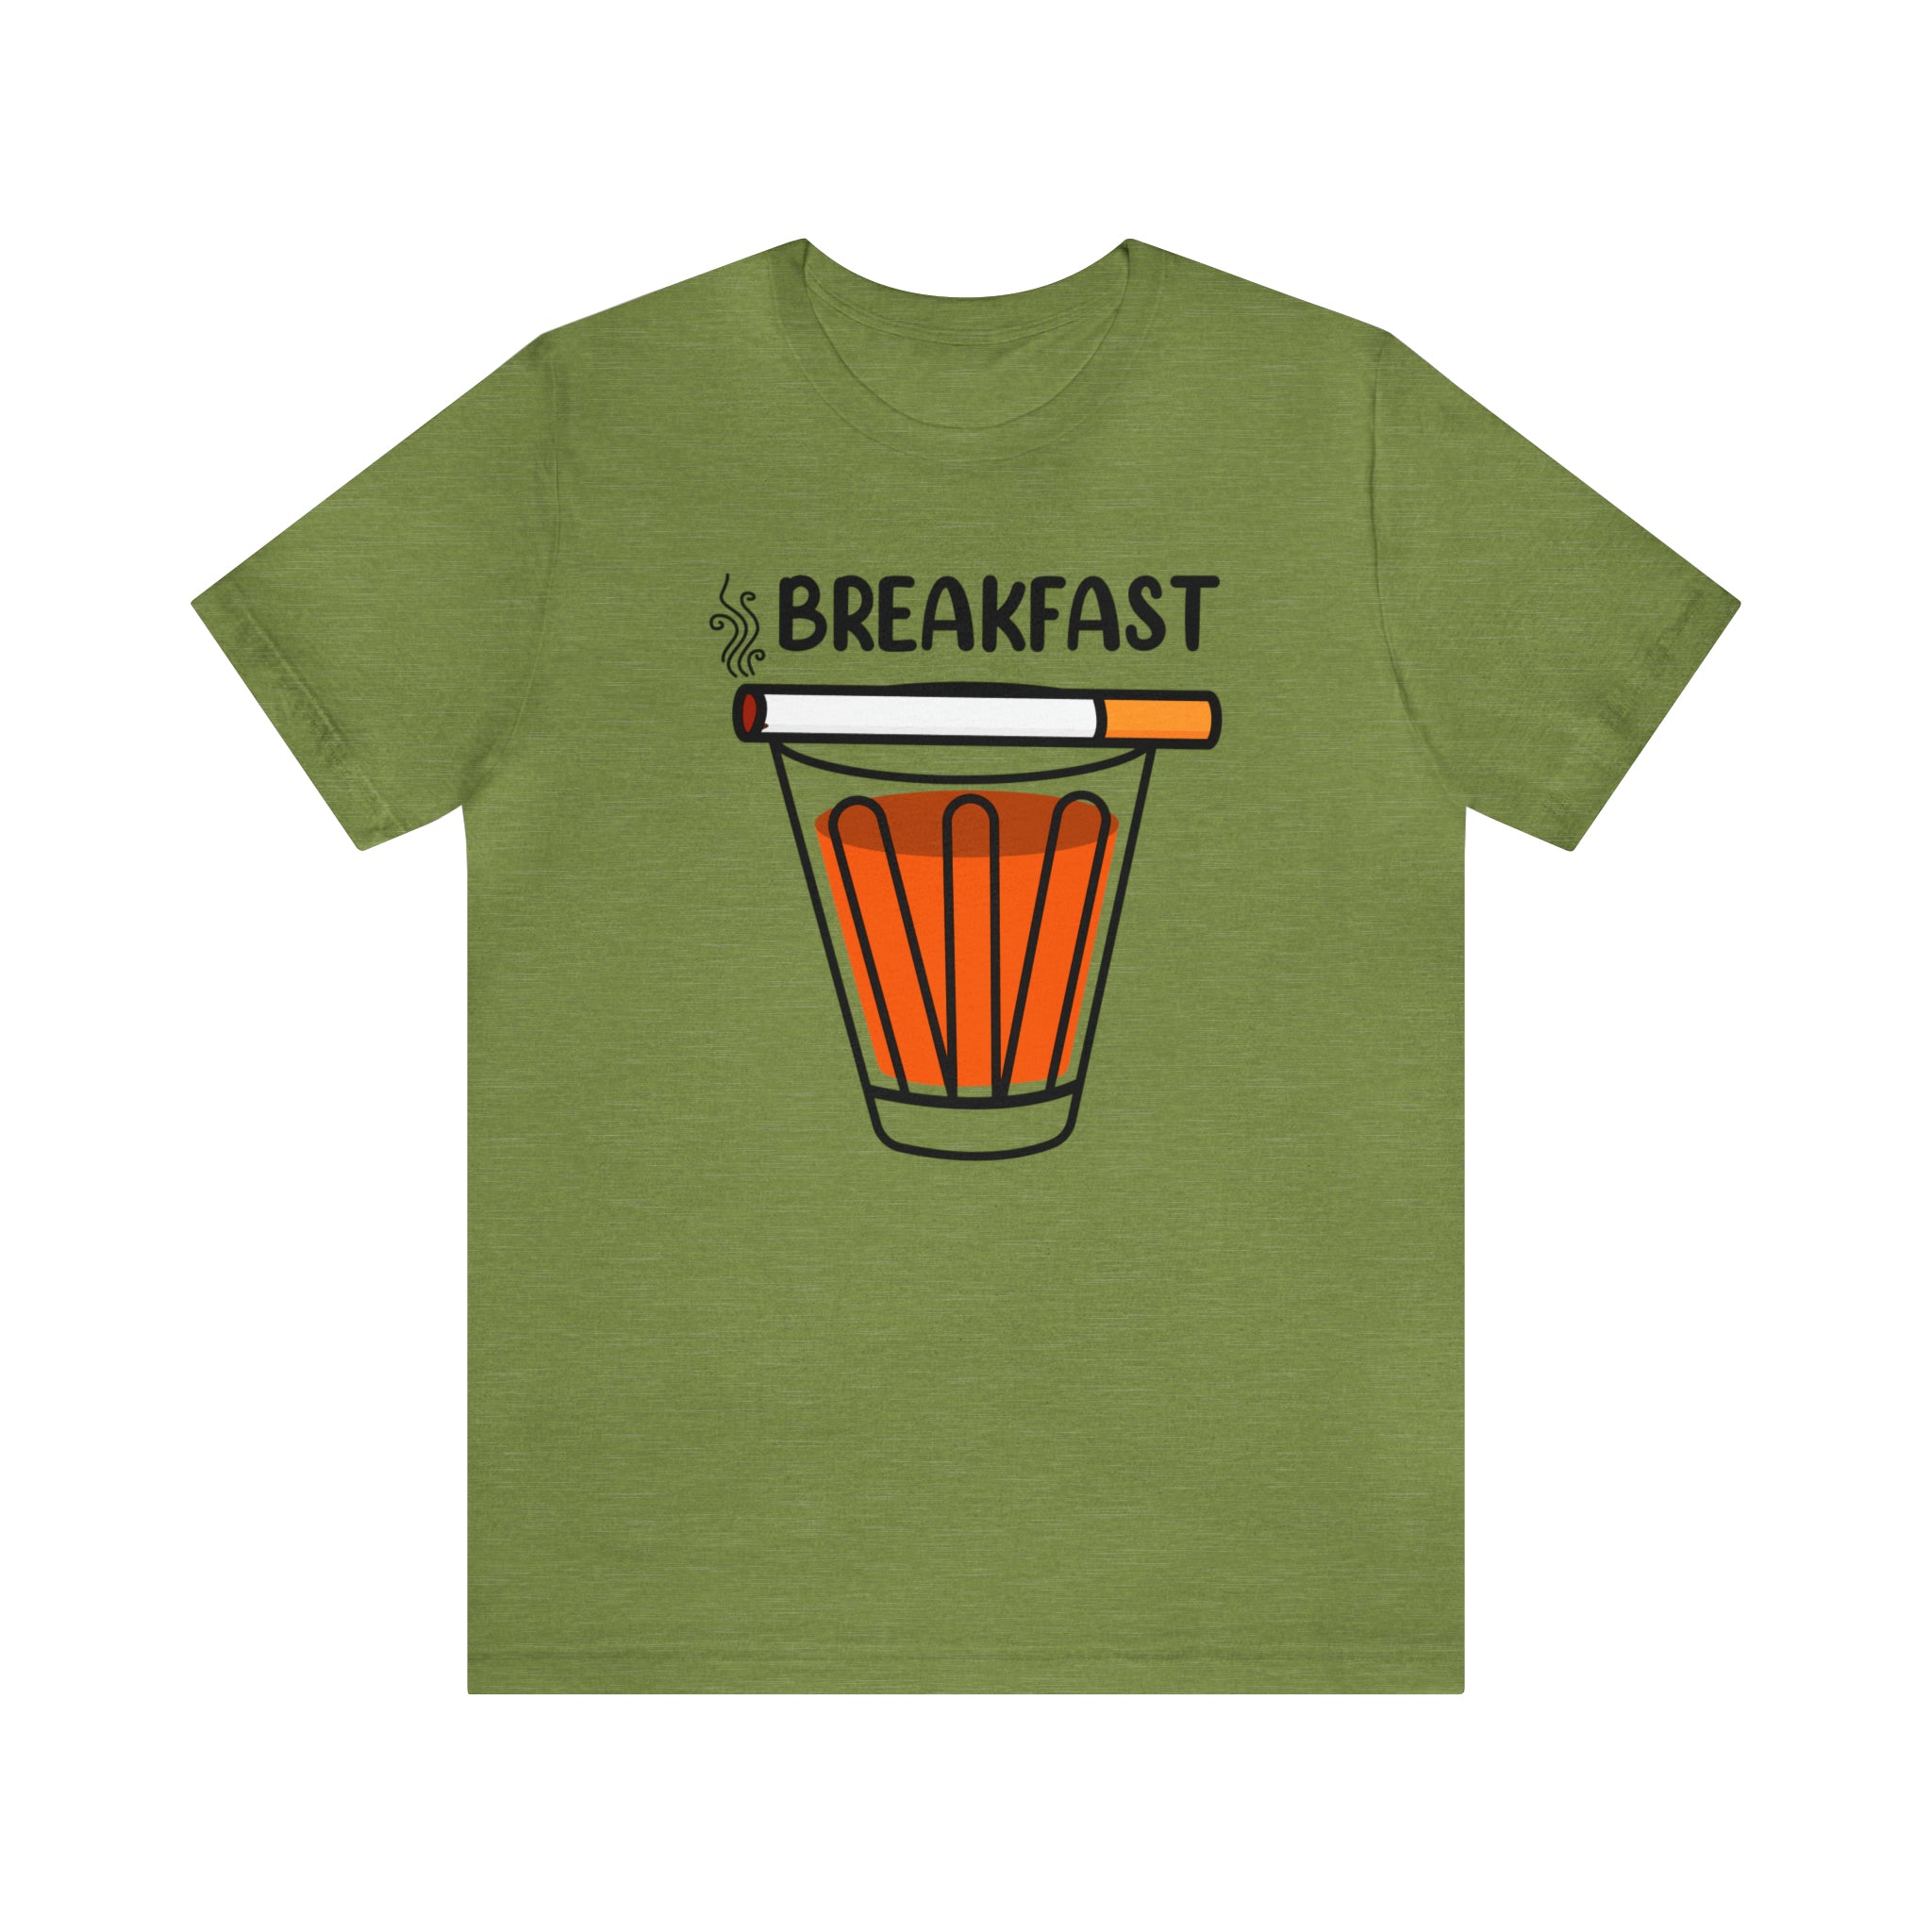 A foodie-inspired green Breakfast T-Shirt with the words breakfast on it.